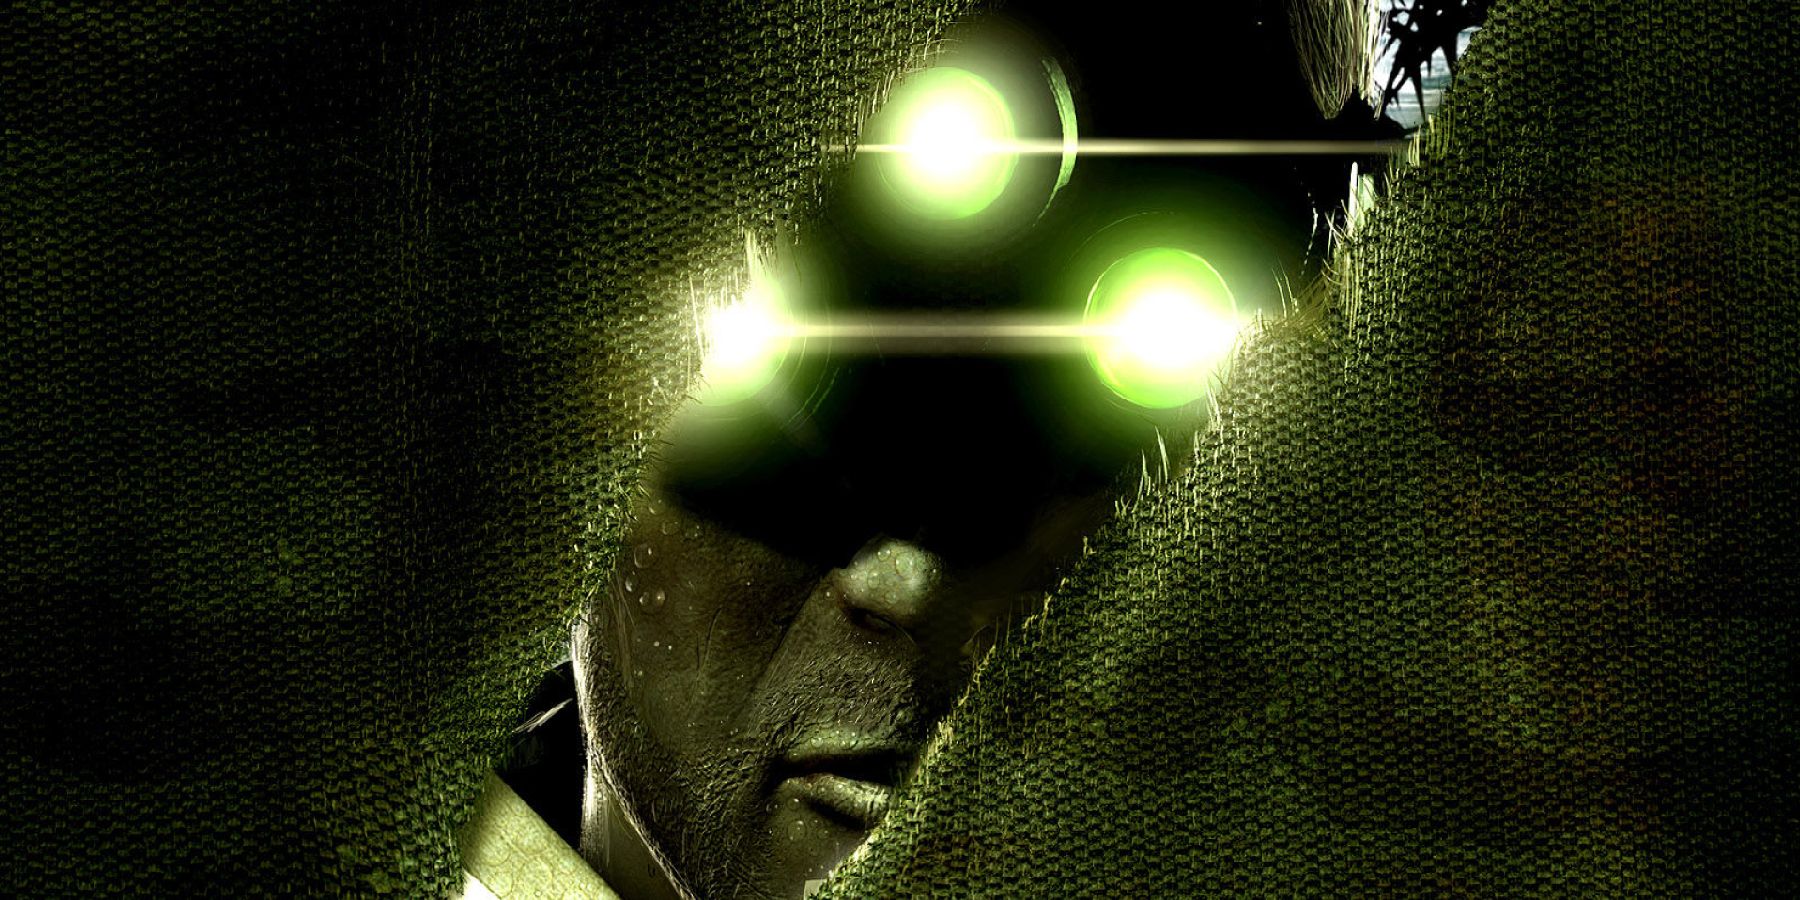 Splinter Cell Remake Should Be as Faithful to the Original as Possible